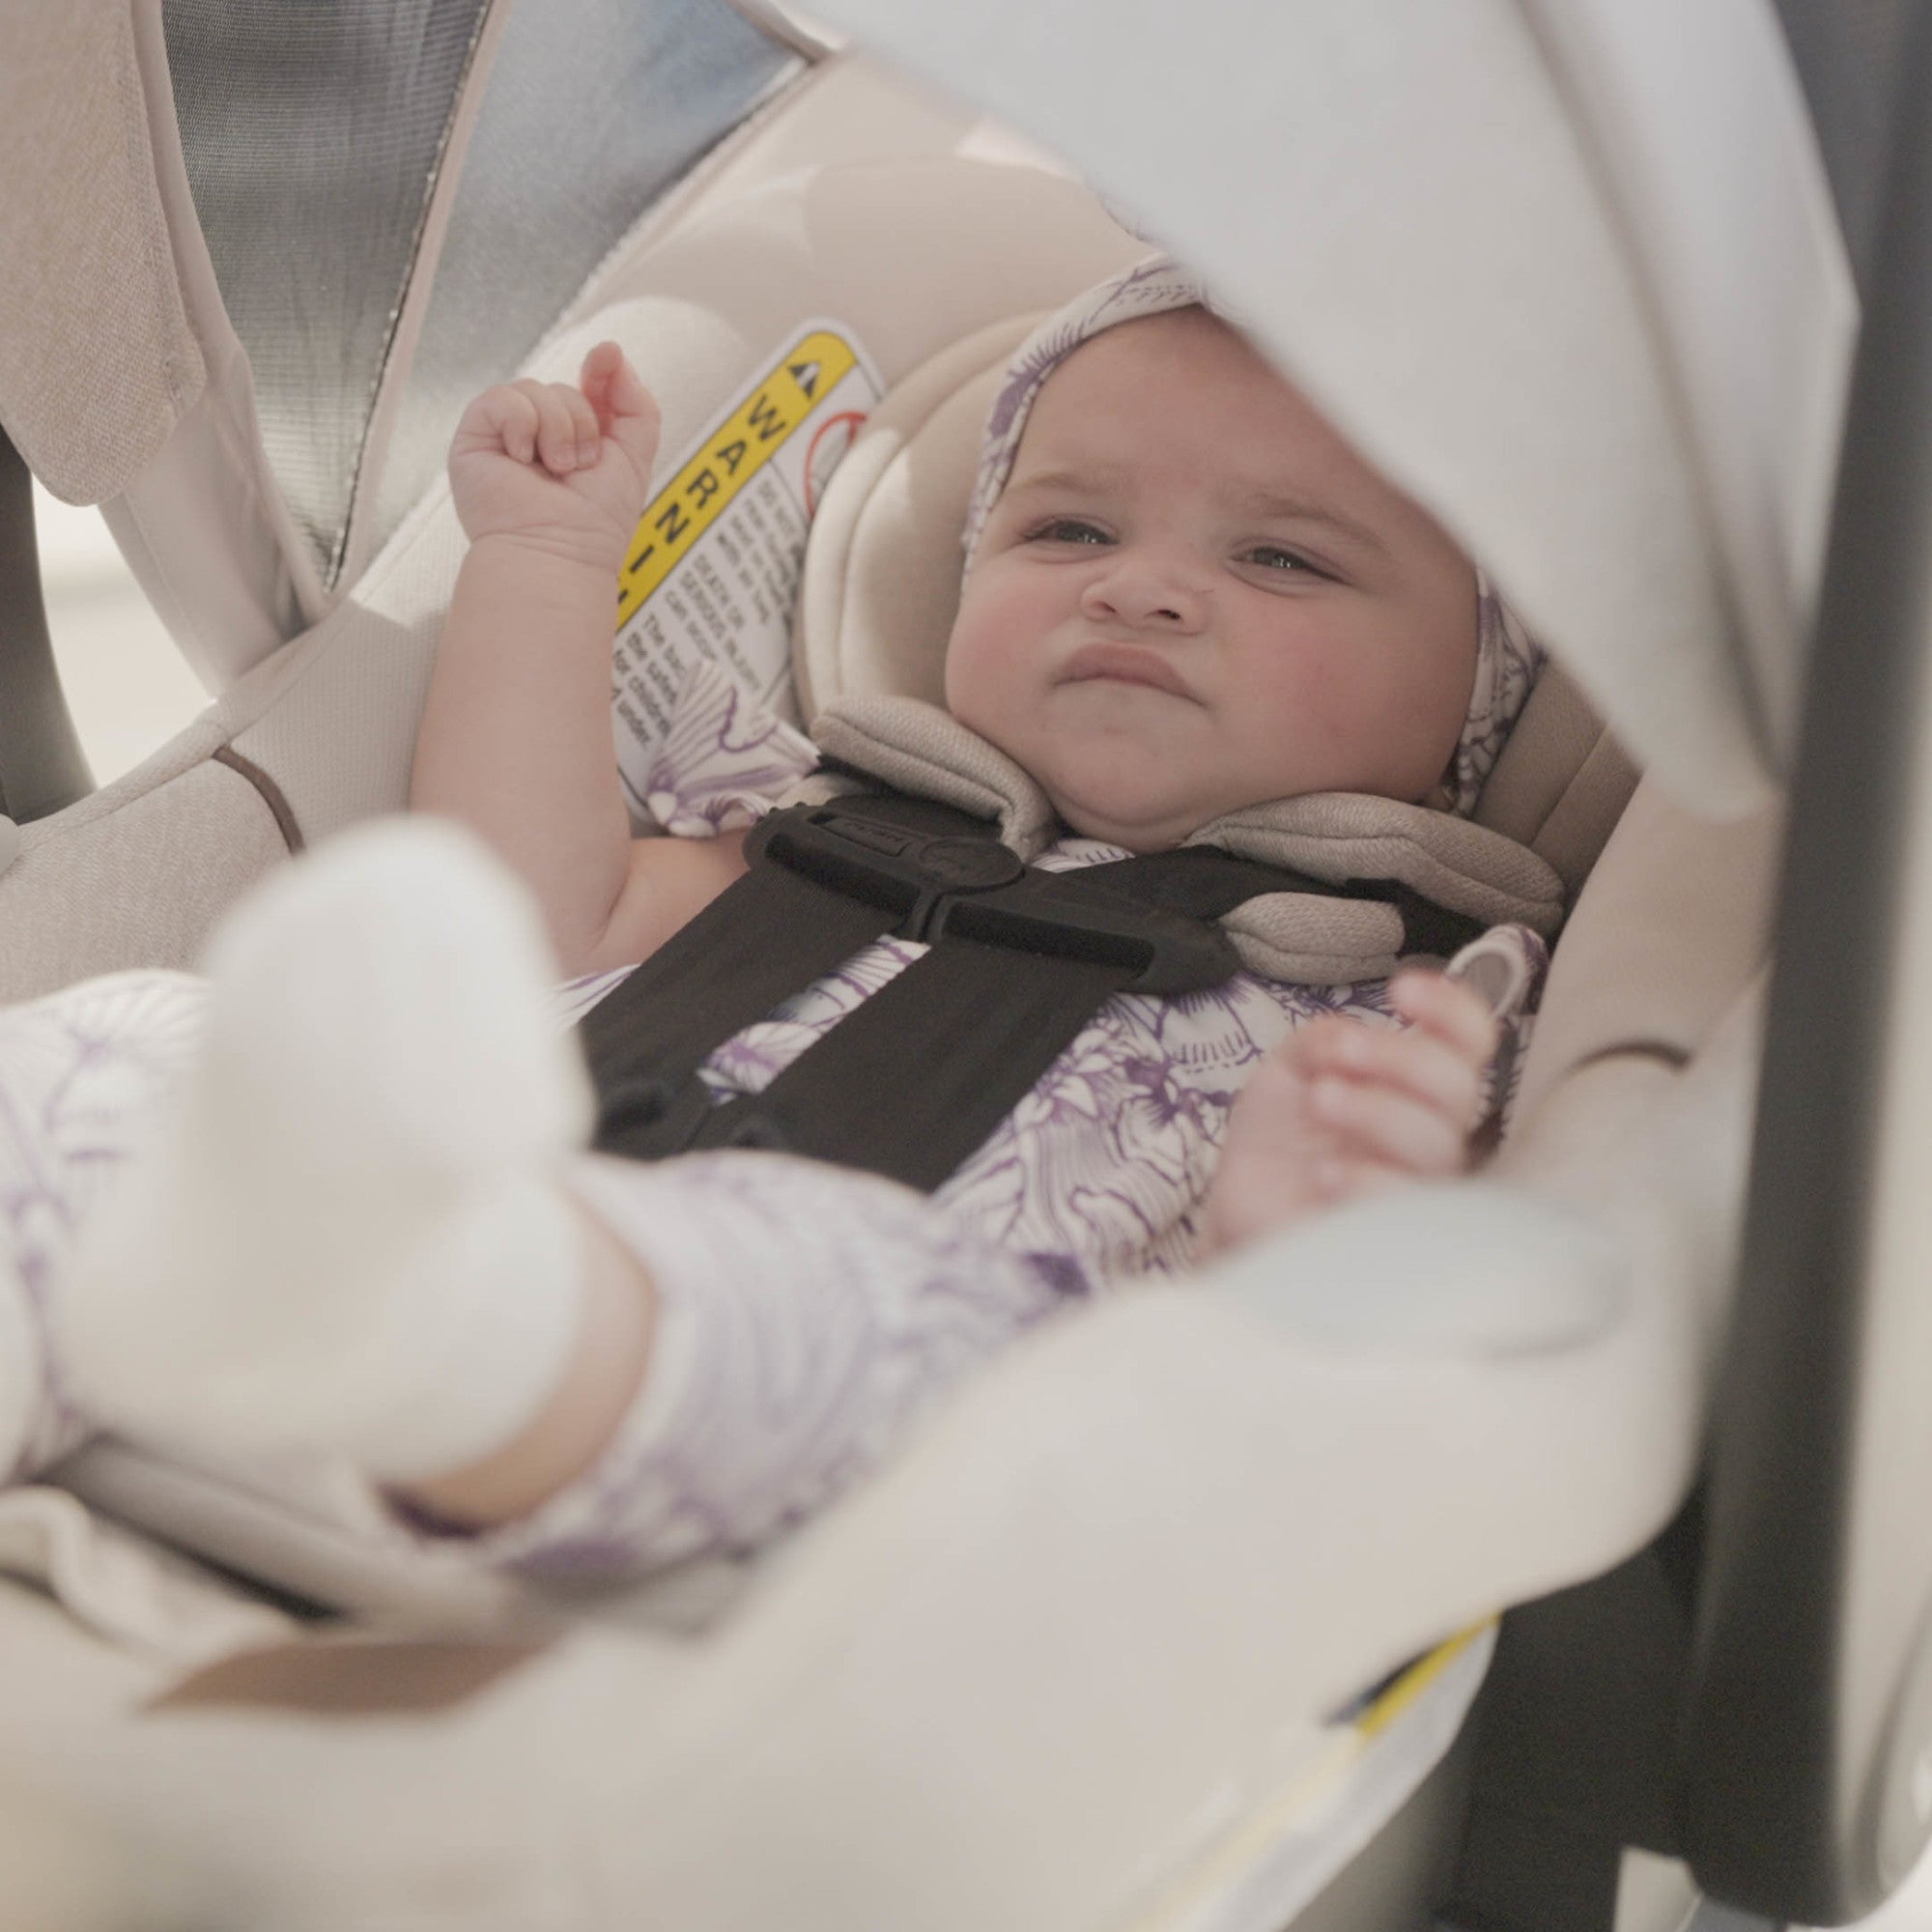 Tayla™ Max Travel System - close up of baby in infant seat